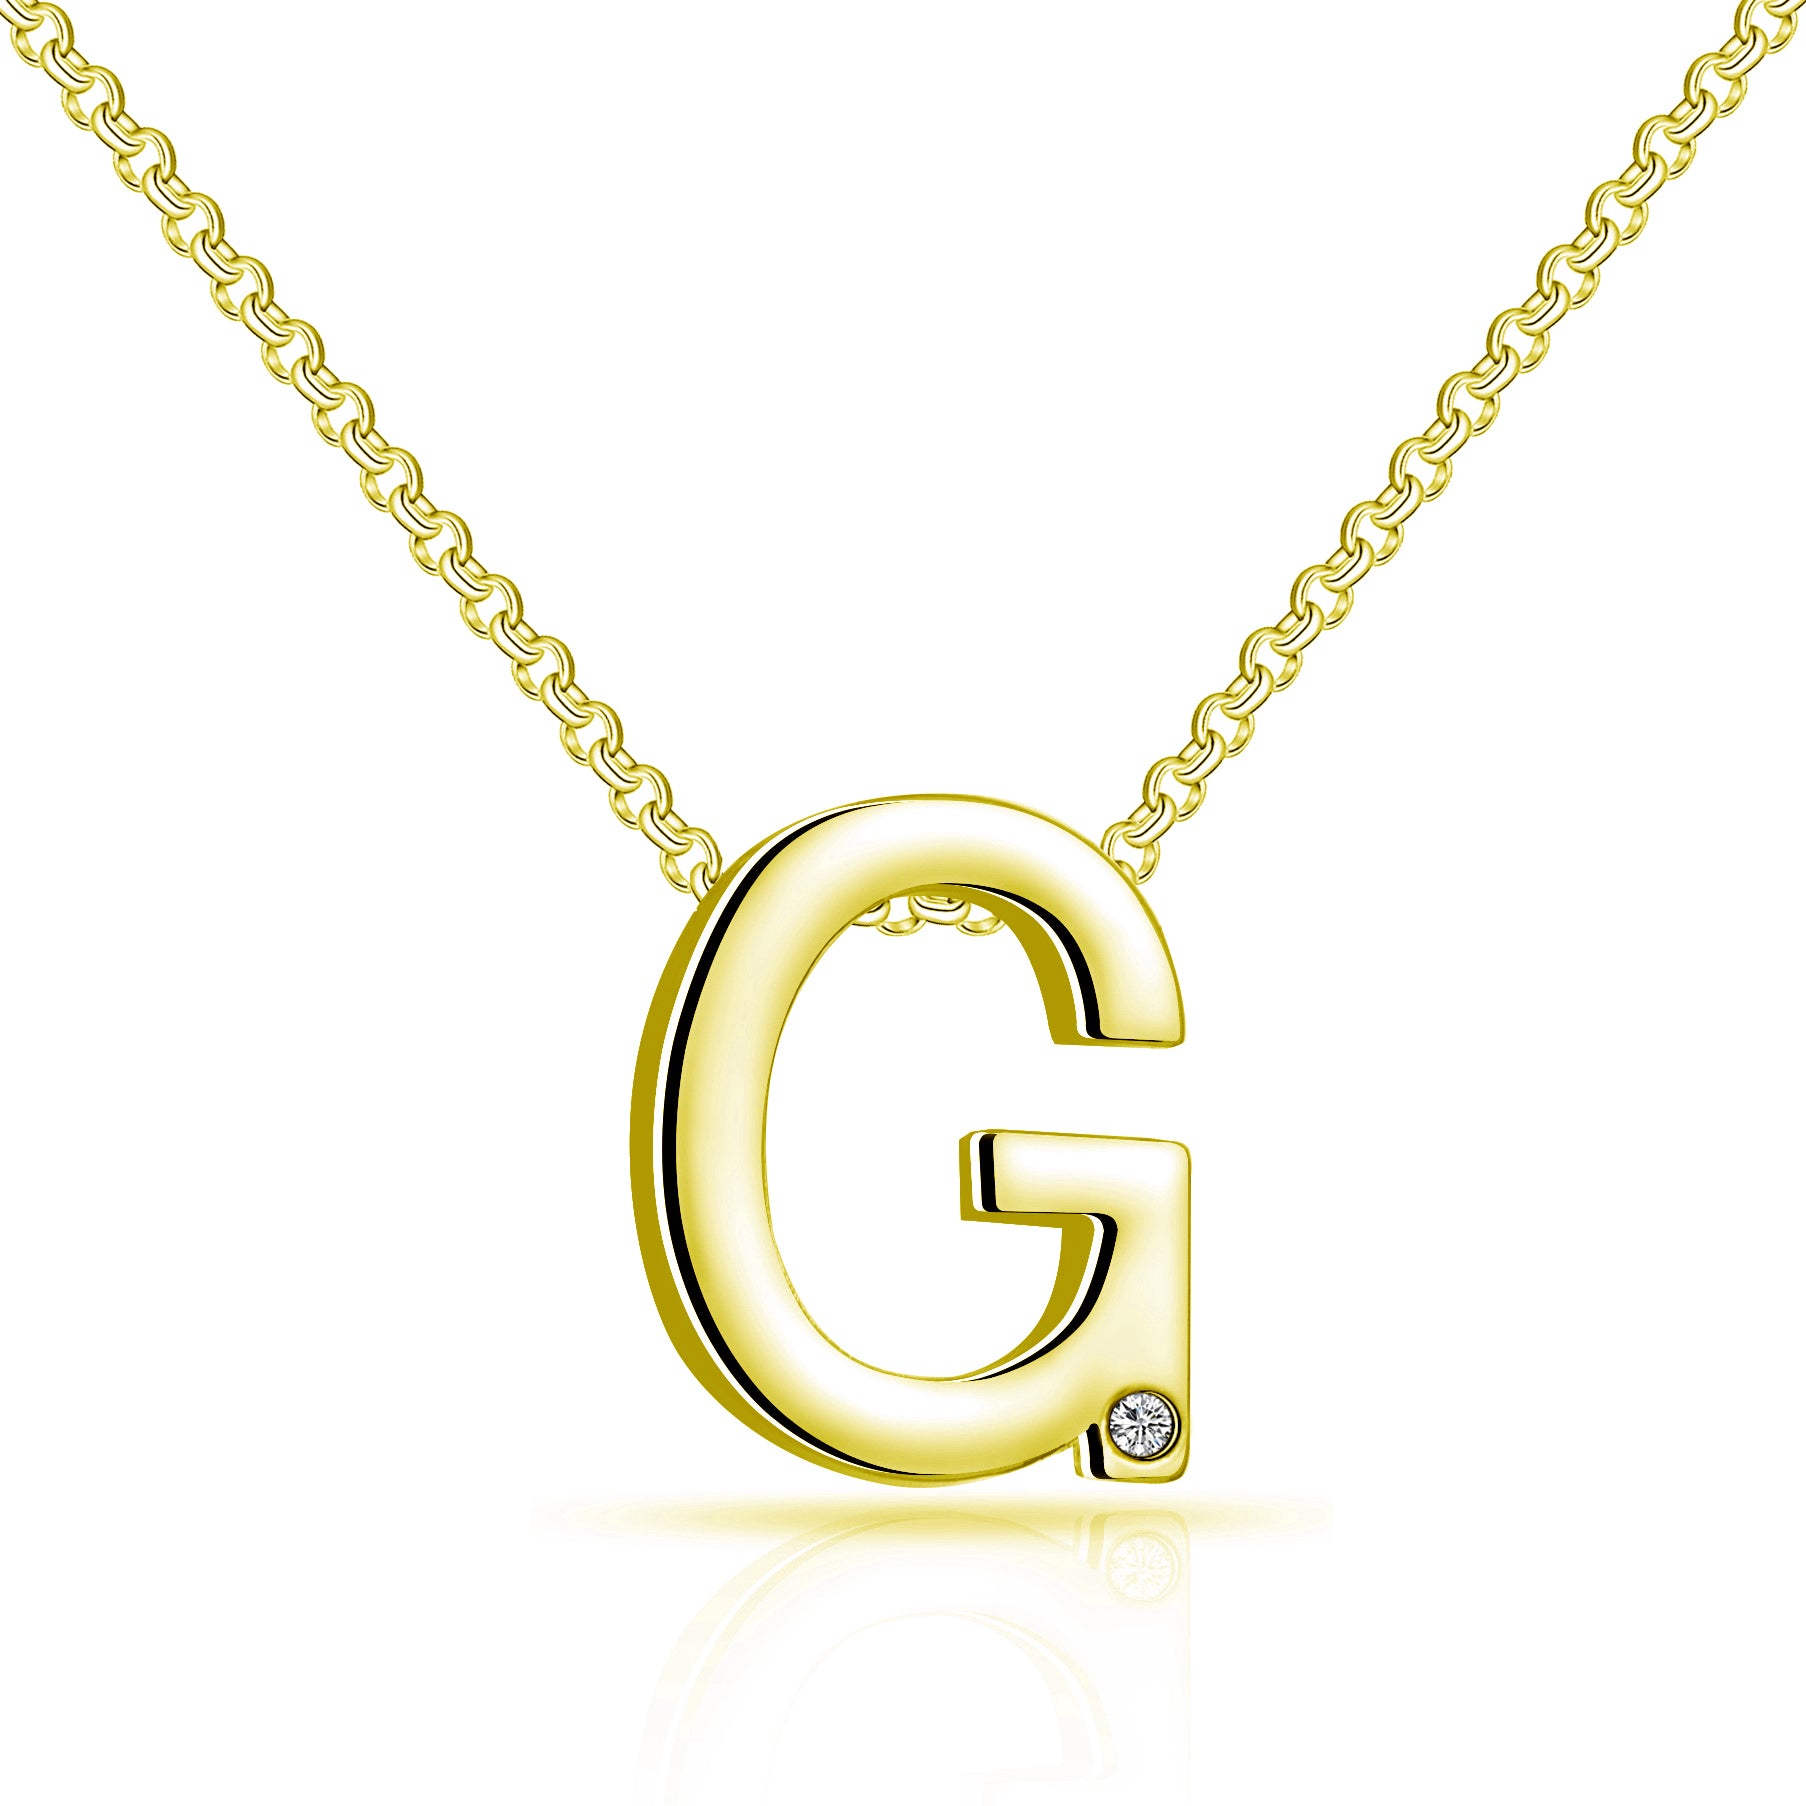 Gold Plated Initial Necklace Letter G Created with Zircondia® Crystals by Philip Jones Jewellery